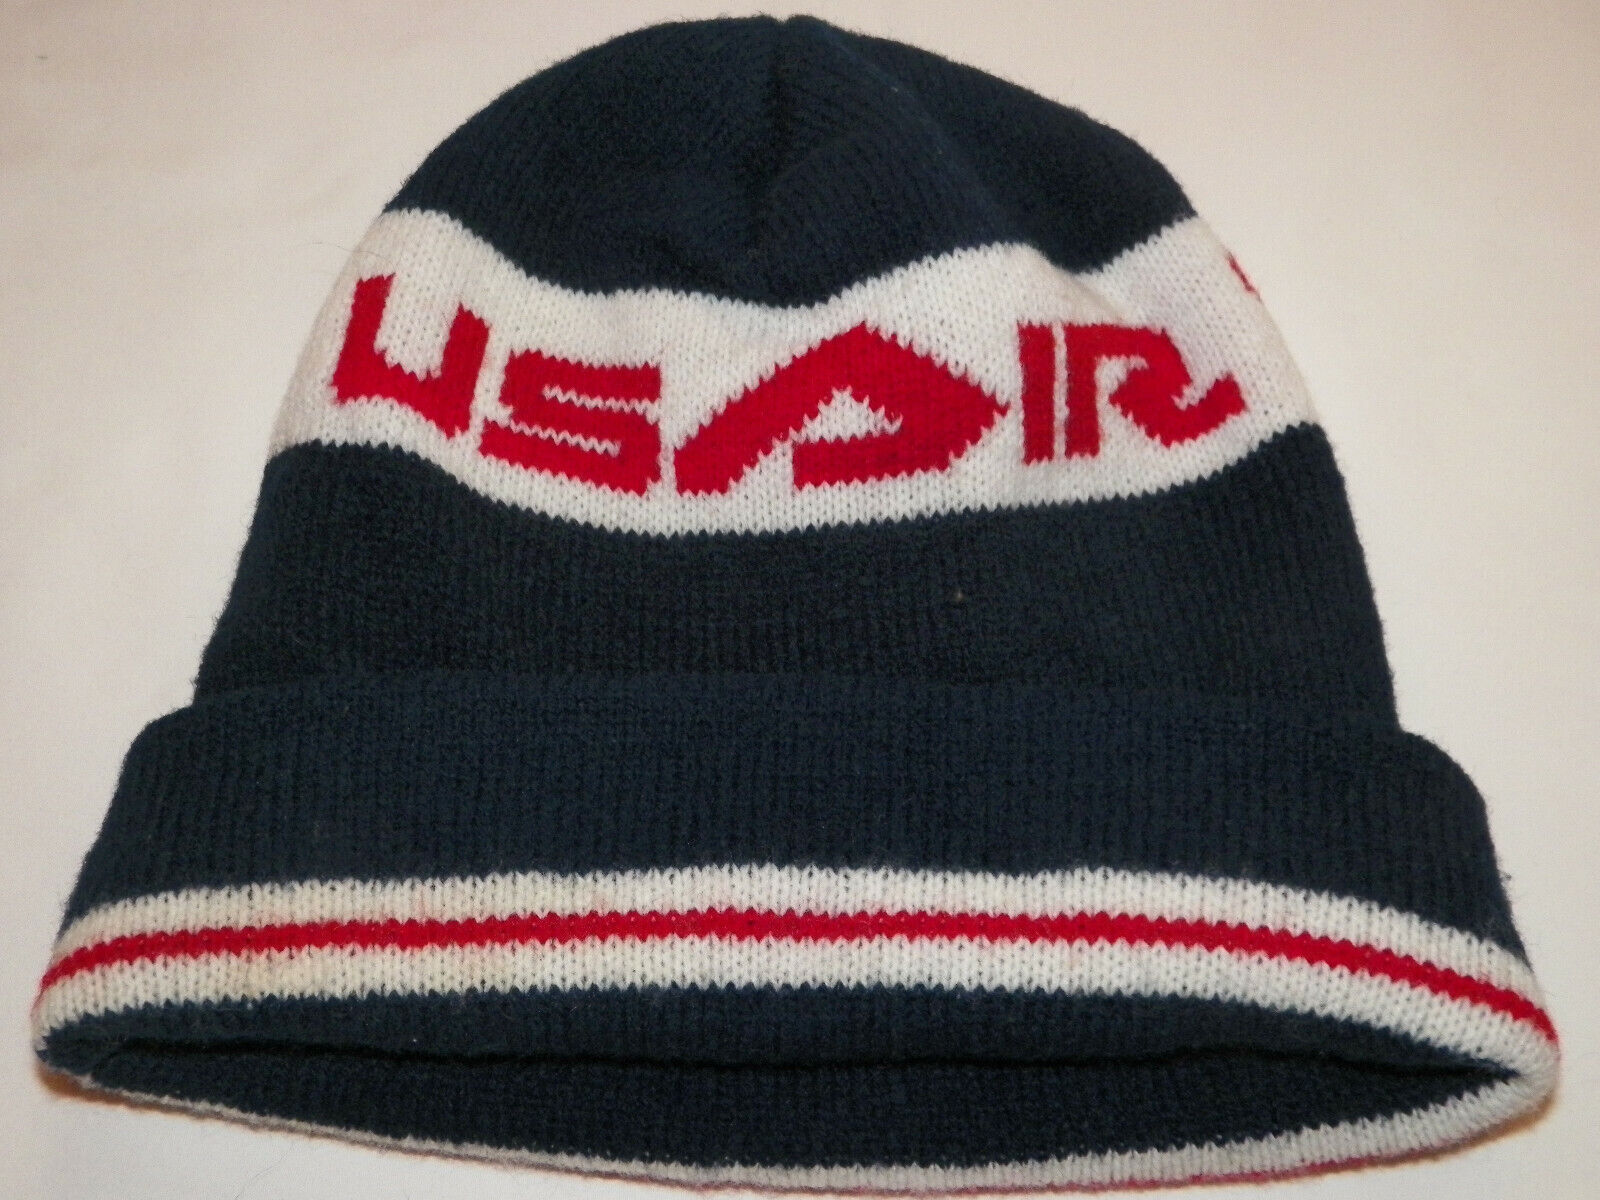 Vintage USAir Airline LOGO Beanie Winter Hat Made in USA Aviation airlines